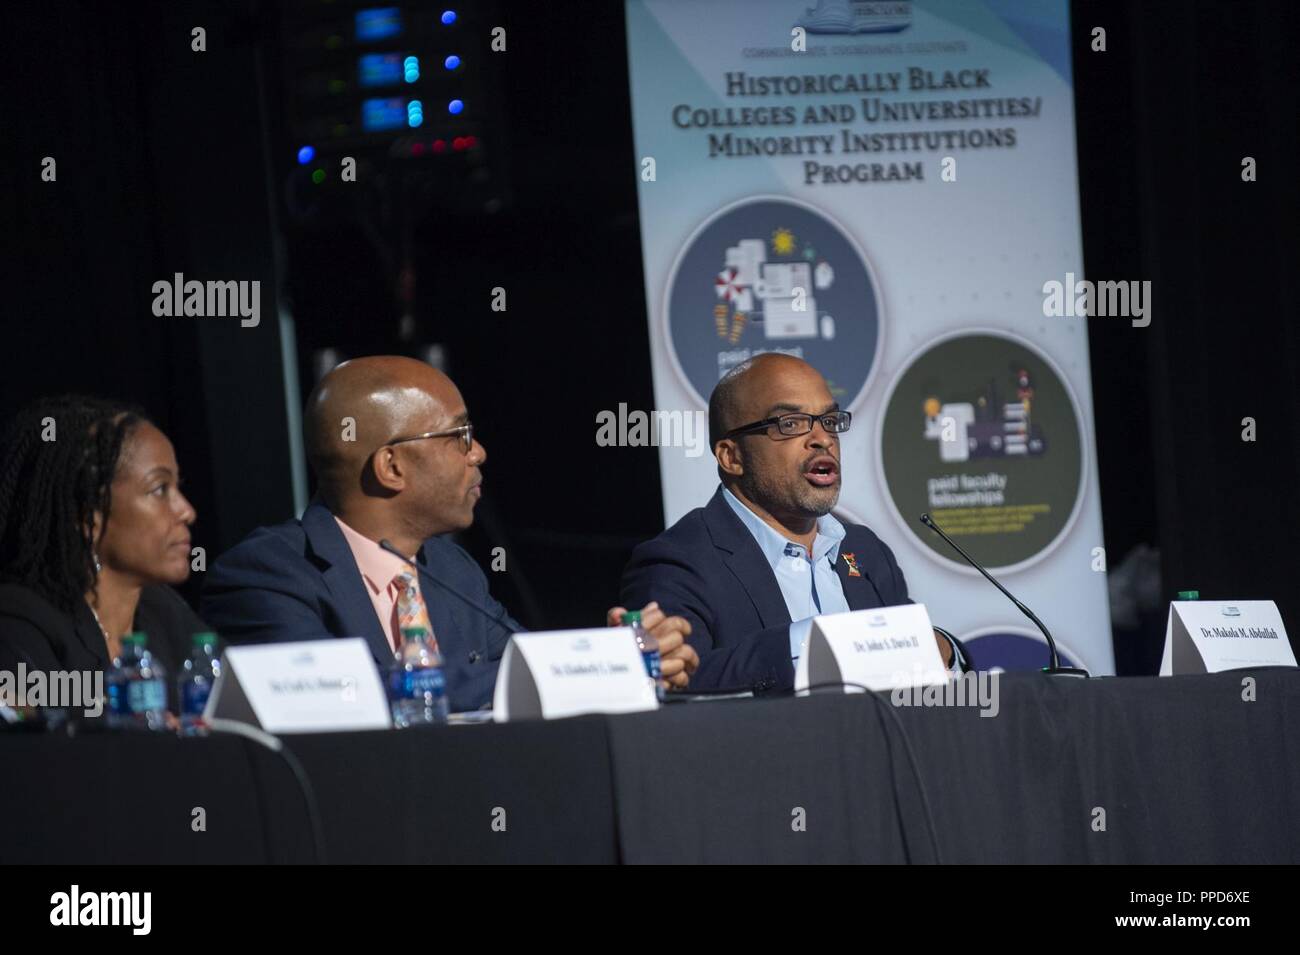 ATLANTA, Ga. (Aug. 30, 2018) Dr. Makola Abdullah, right, president,  Virginia State University, joined a panel consisting of seven friends and  former engineering students at Howard University (HU) who now have PhDs